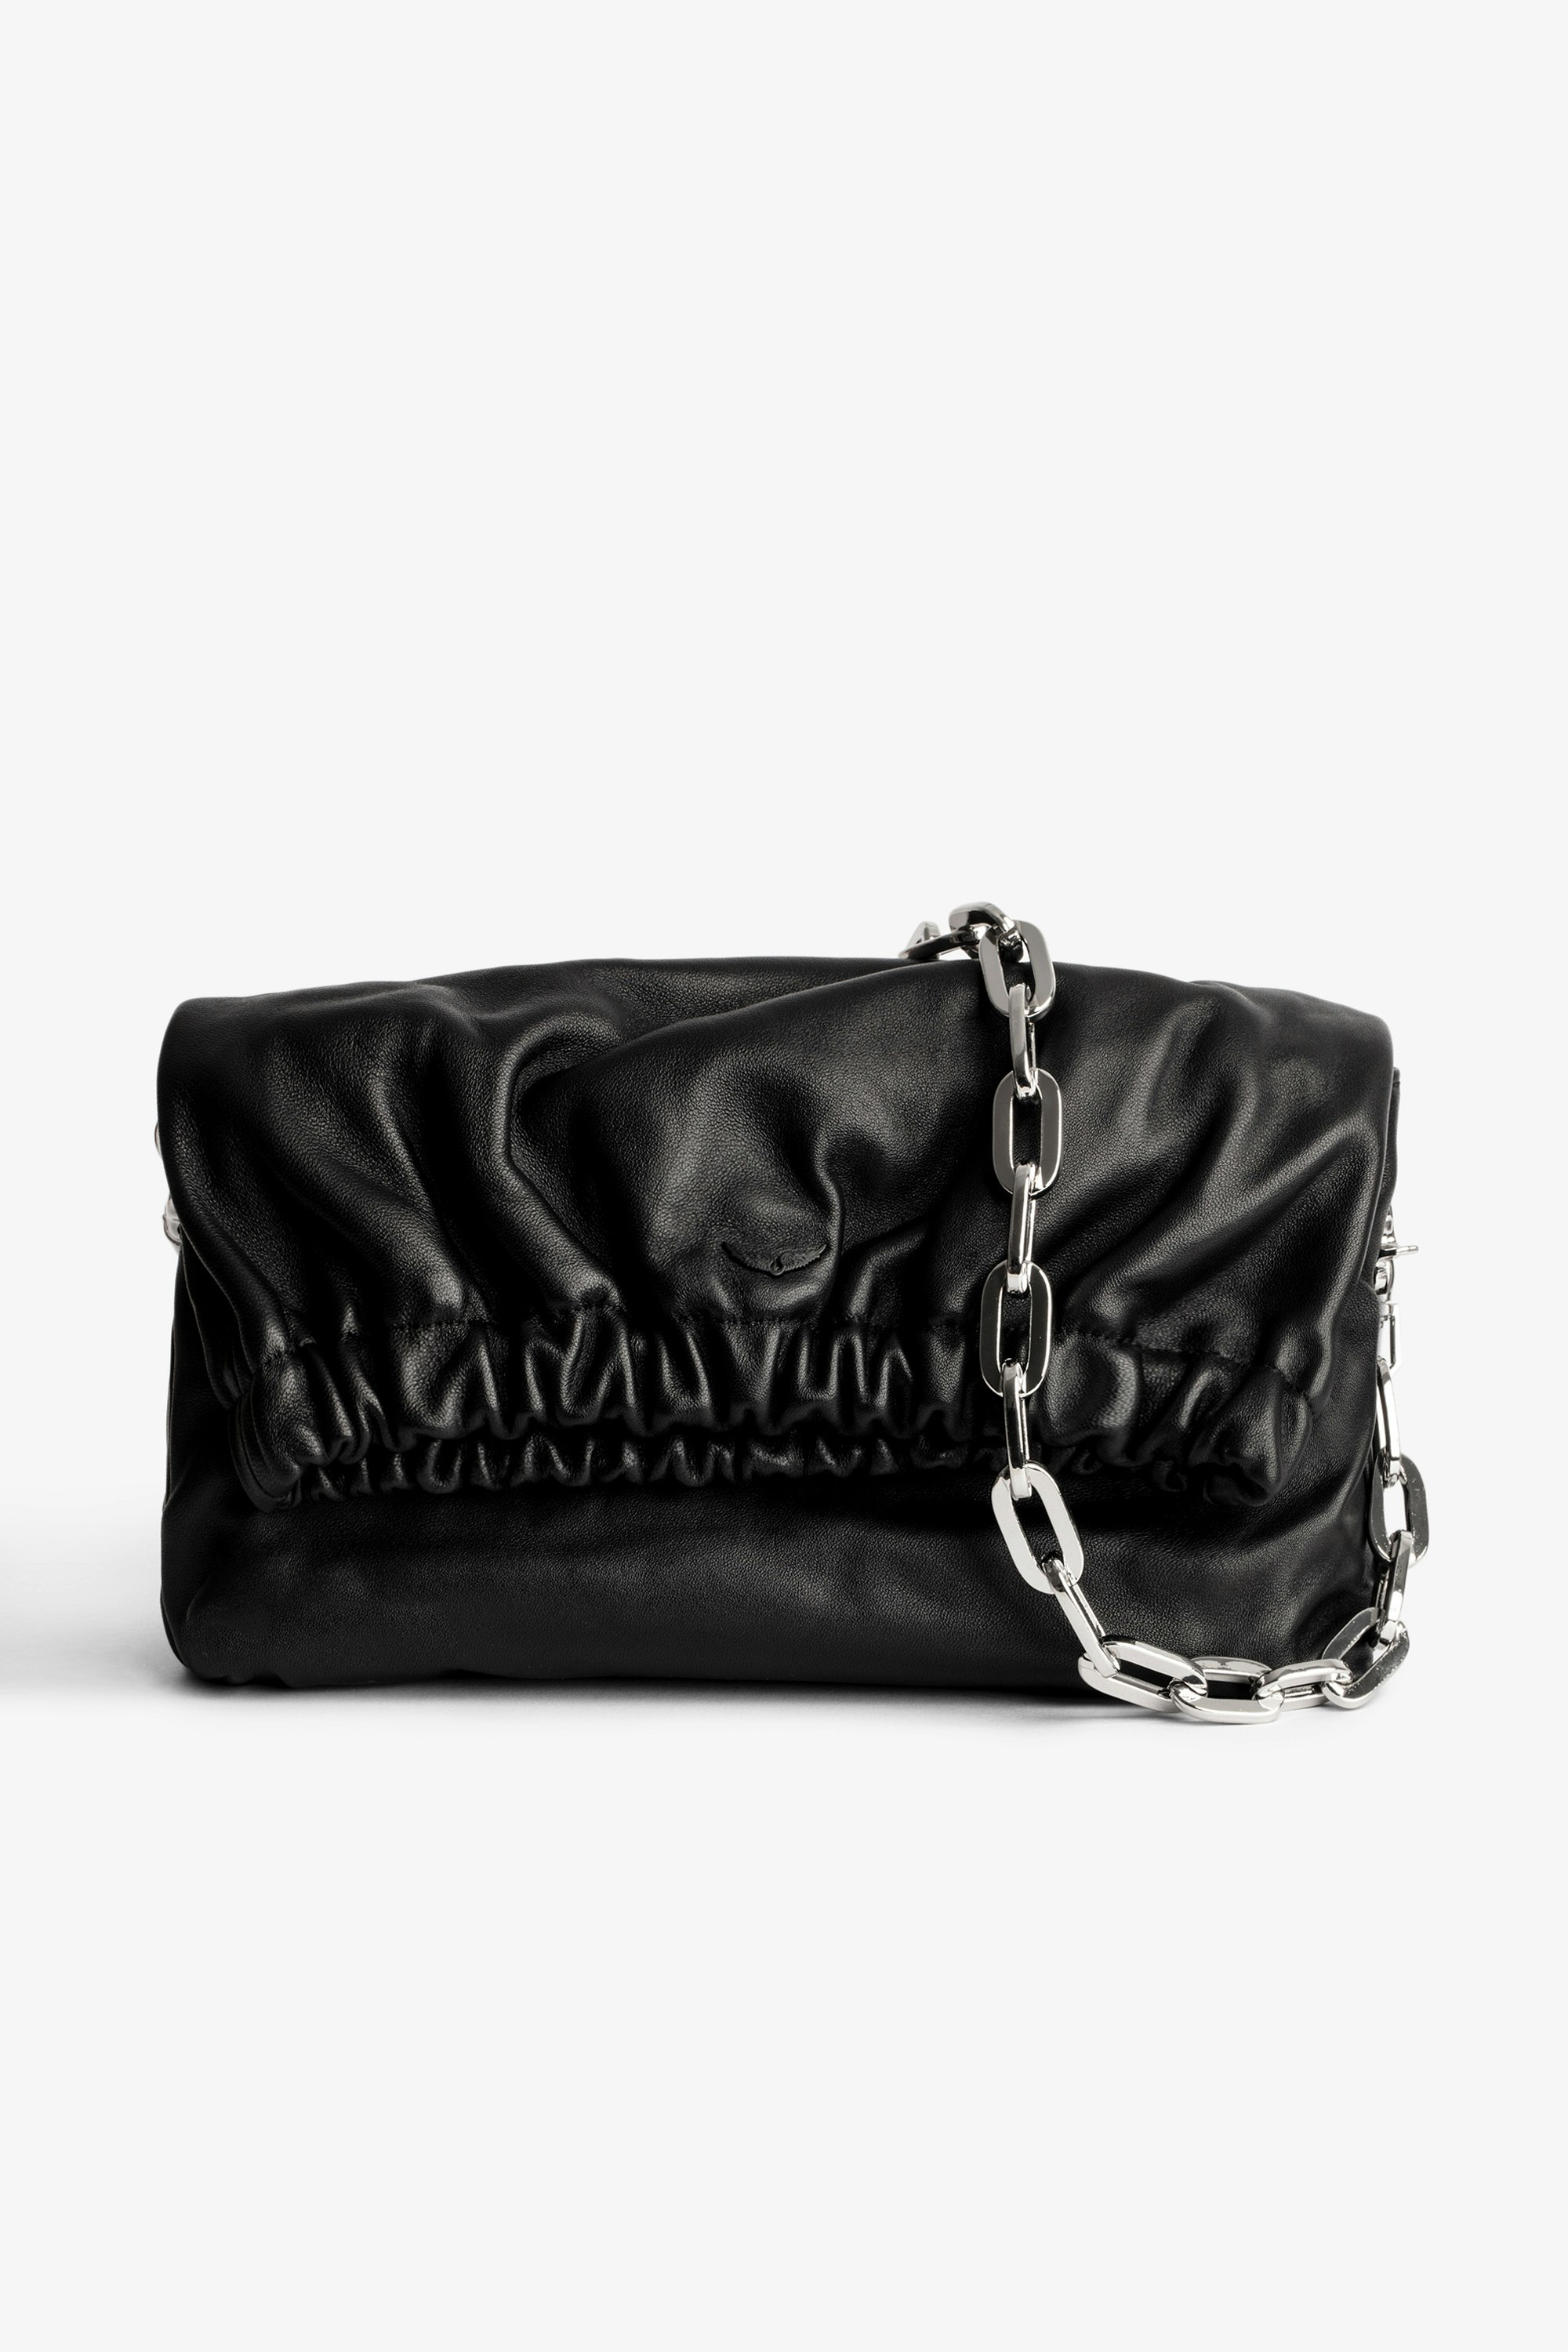 Rockyssime Bag Women’s smooth black leather gathered clutch purse with silver chain